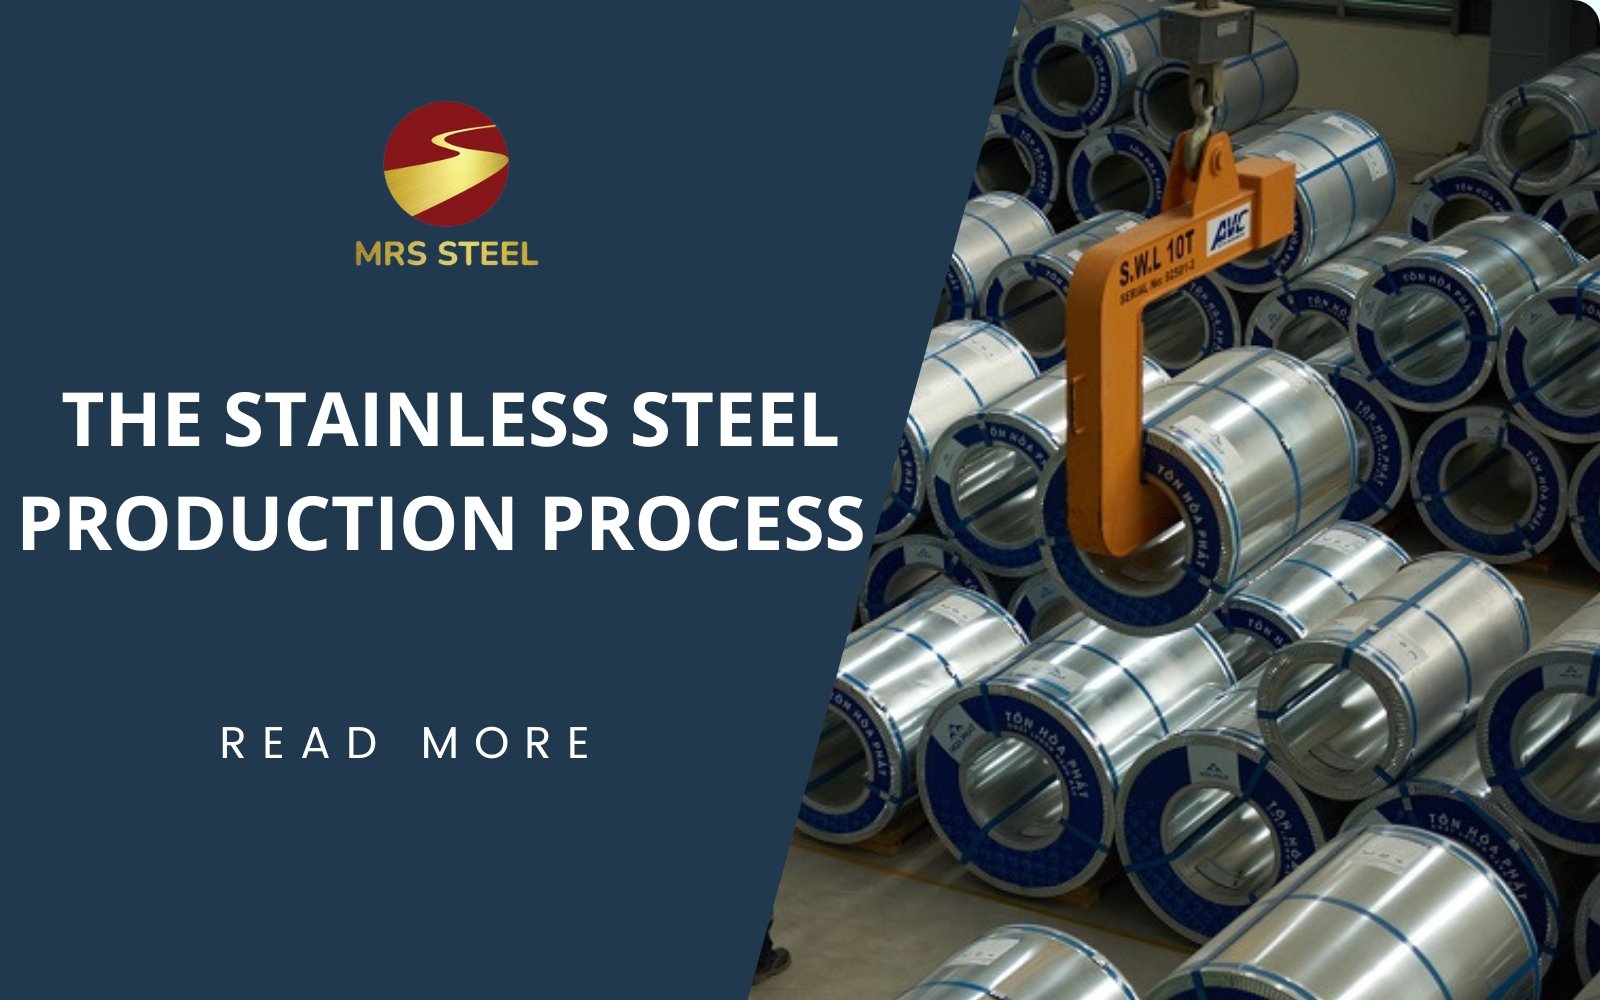 Explore the stainless steel production process from A-Z